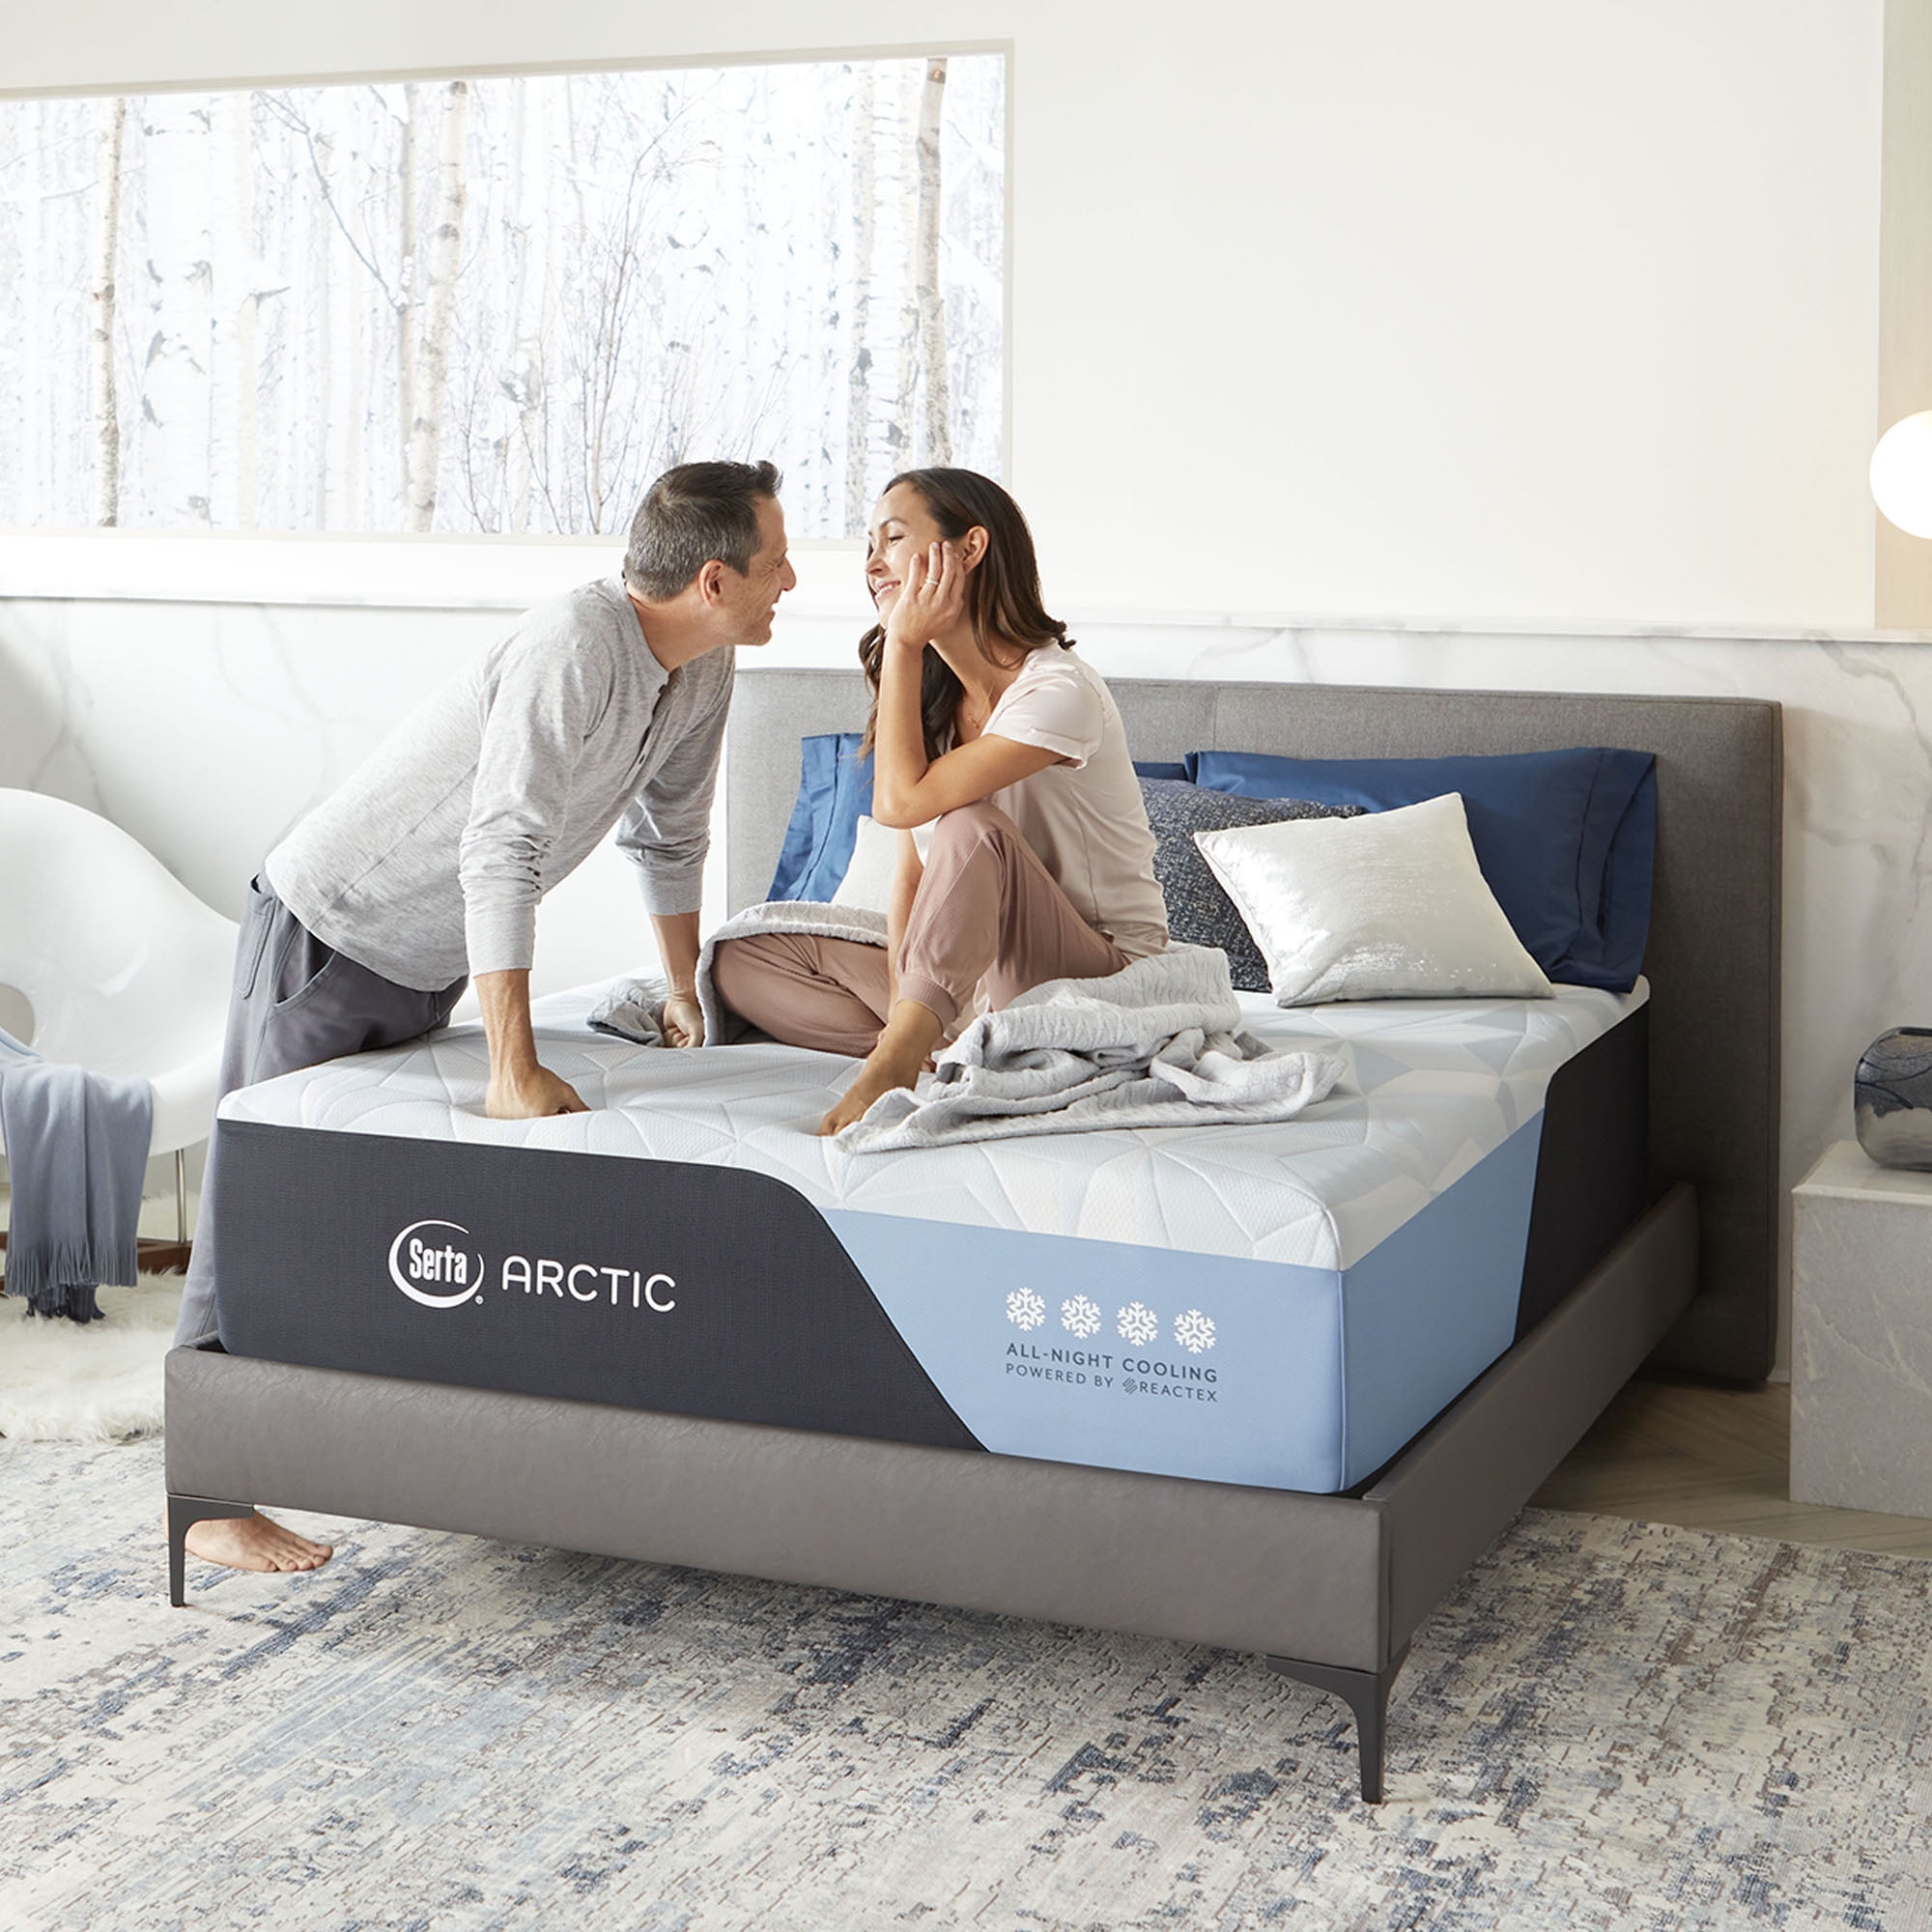 Serta Arctic Cooling Sheets Review - Personally Tested